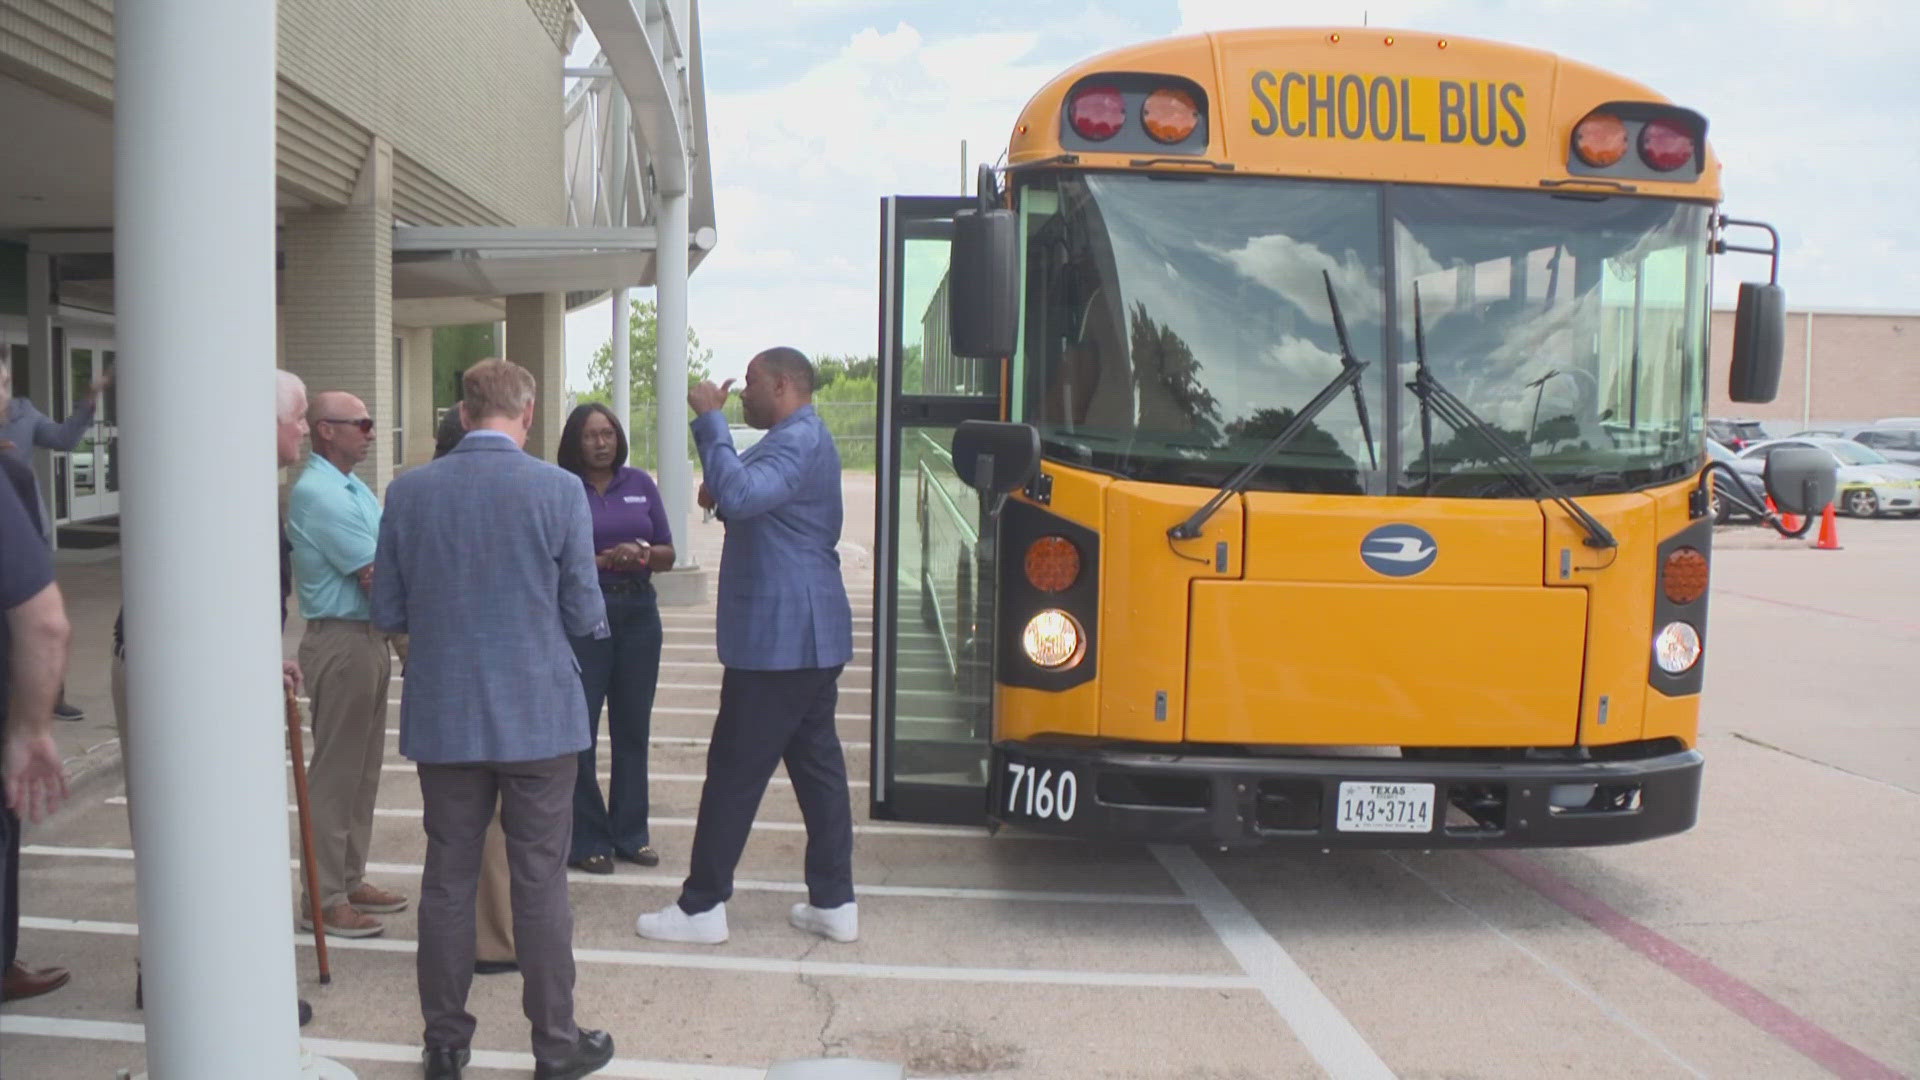 The 15 new buses will be funded by an EPA grant as a part of the Clean Bus Program.